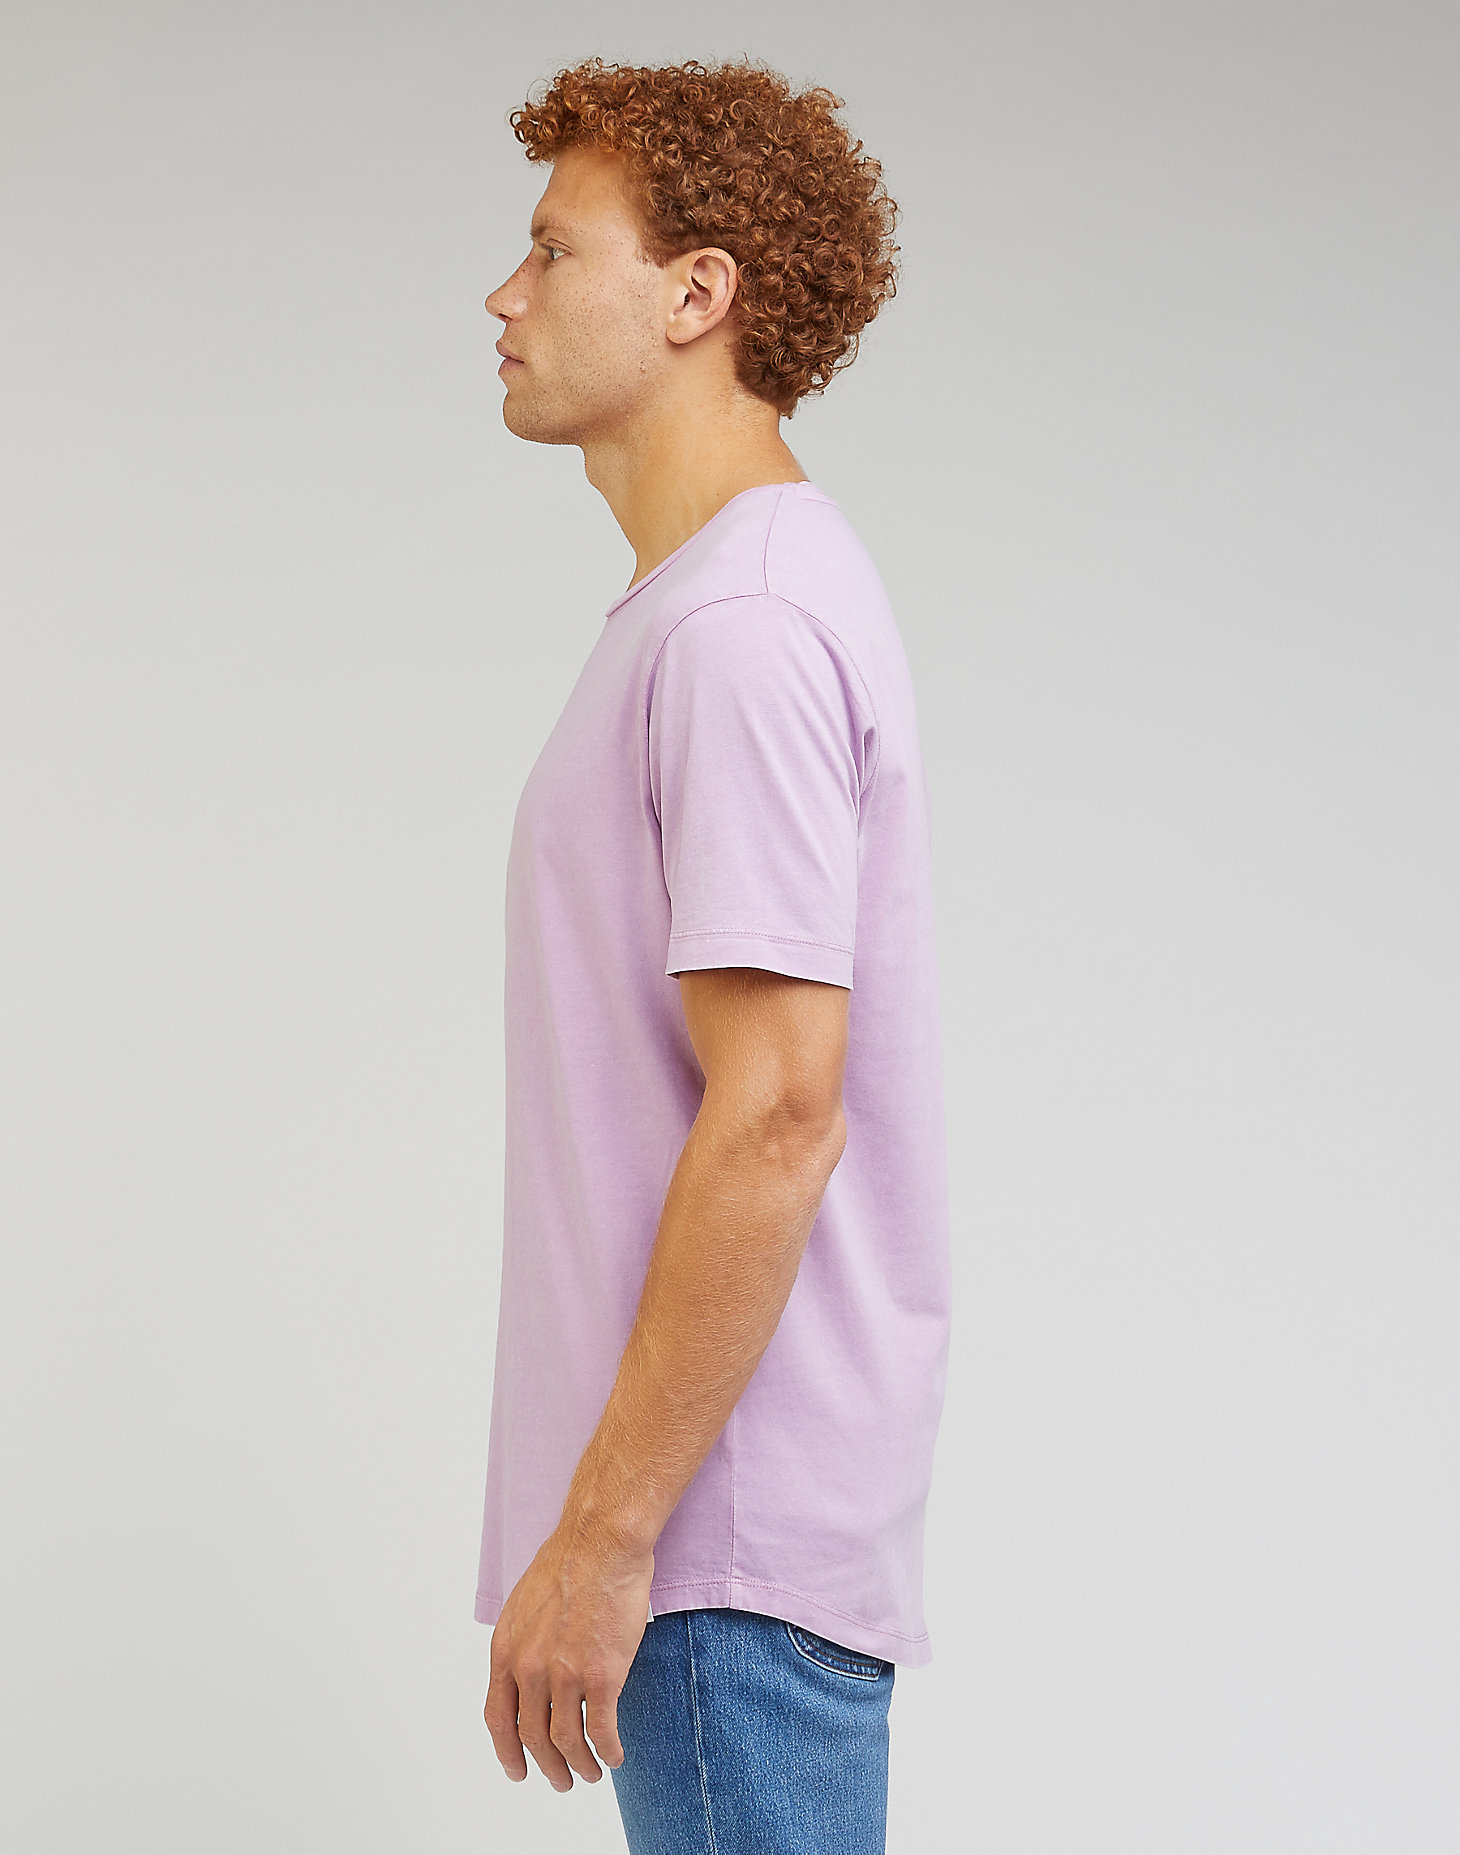 Shaped Tee in Pansy alternative view 3